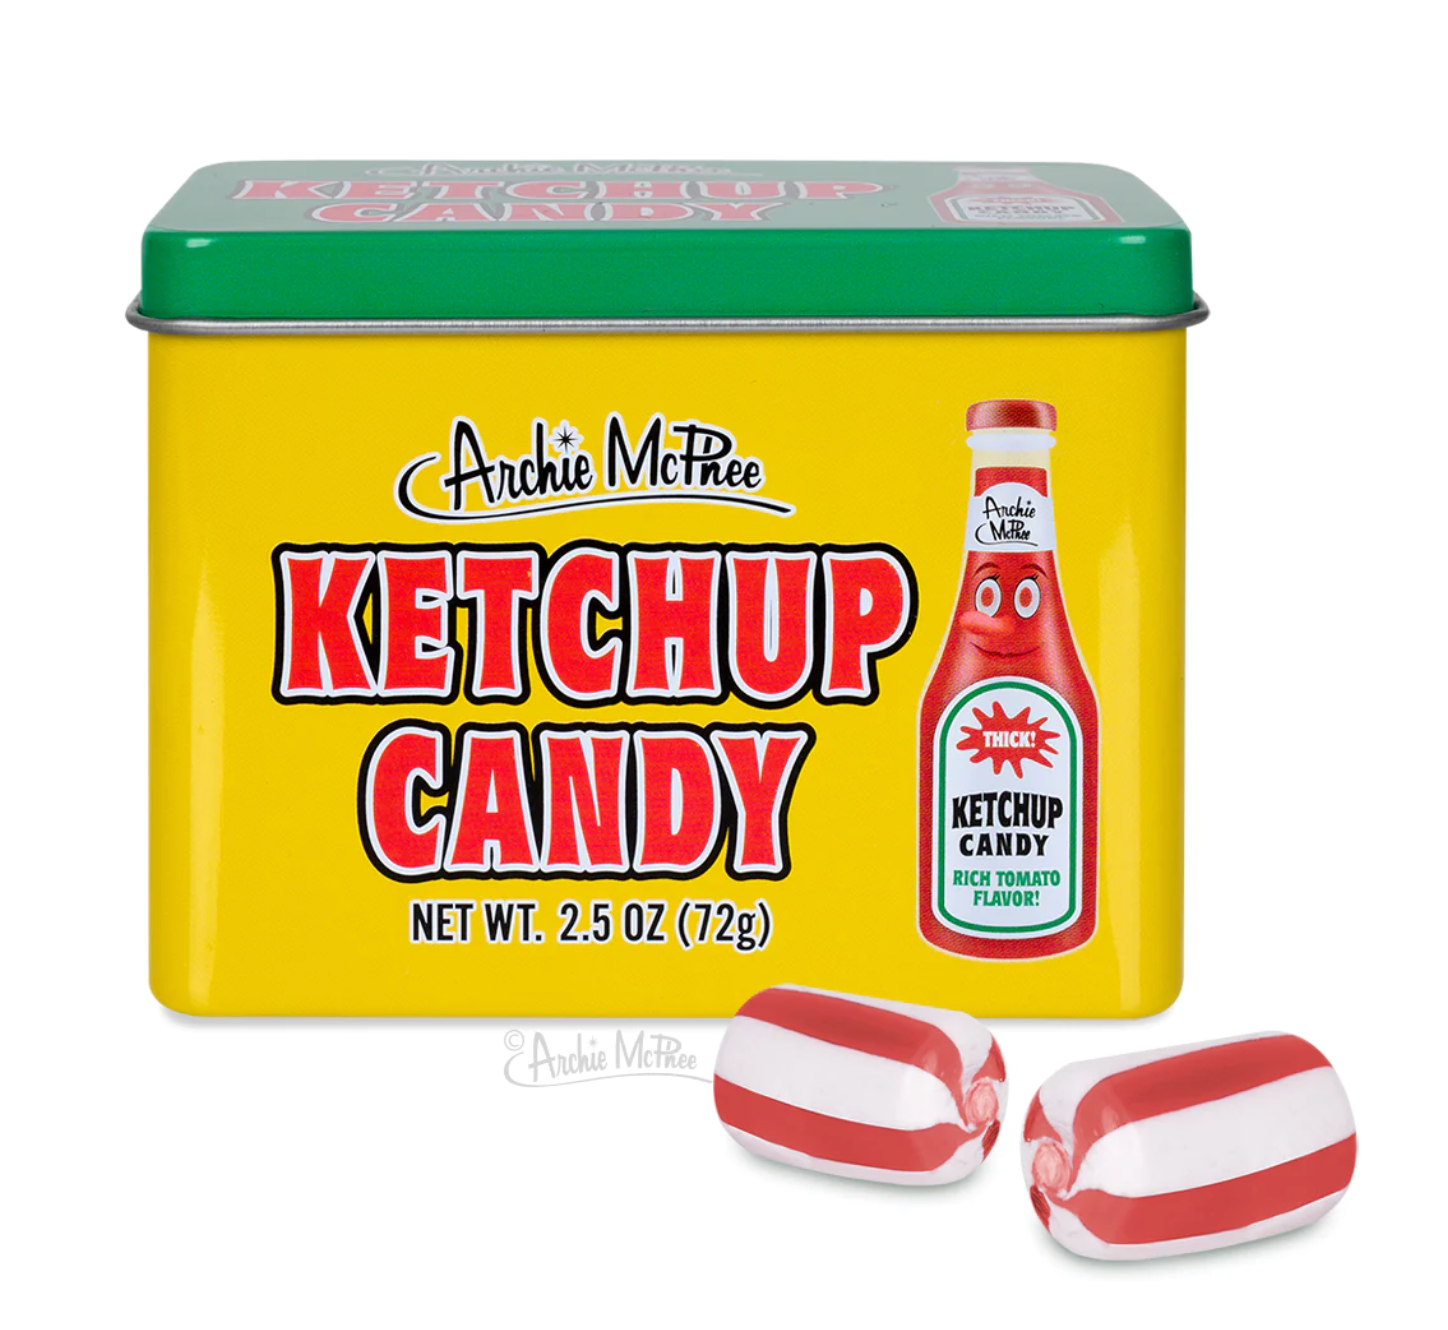 Archie McPhee - Ketchup Candy - 72g